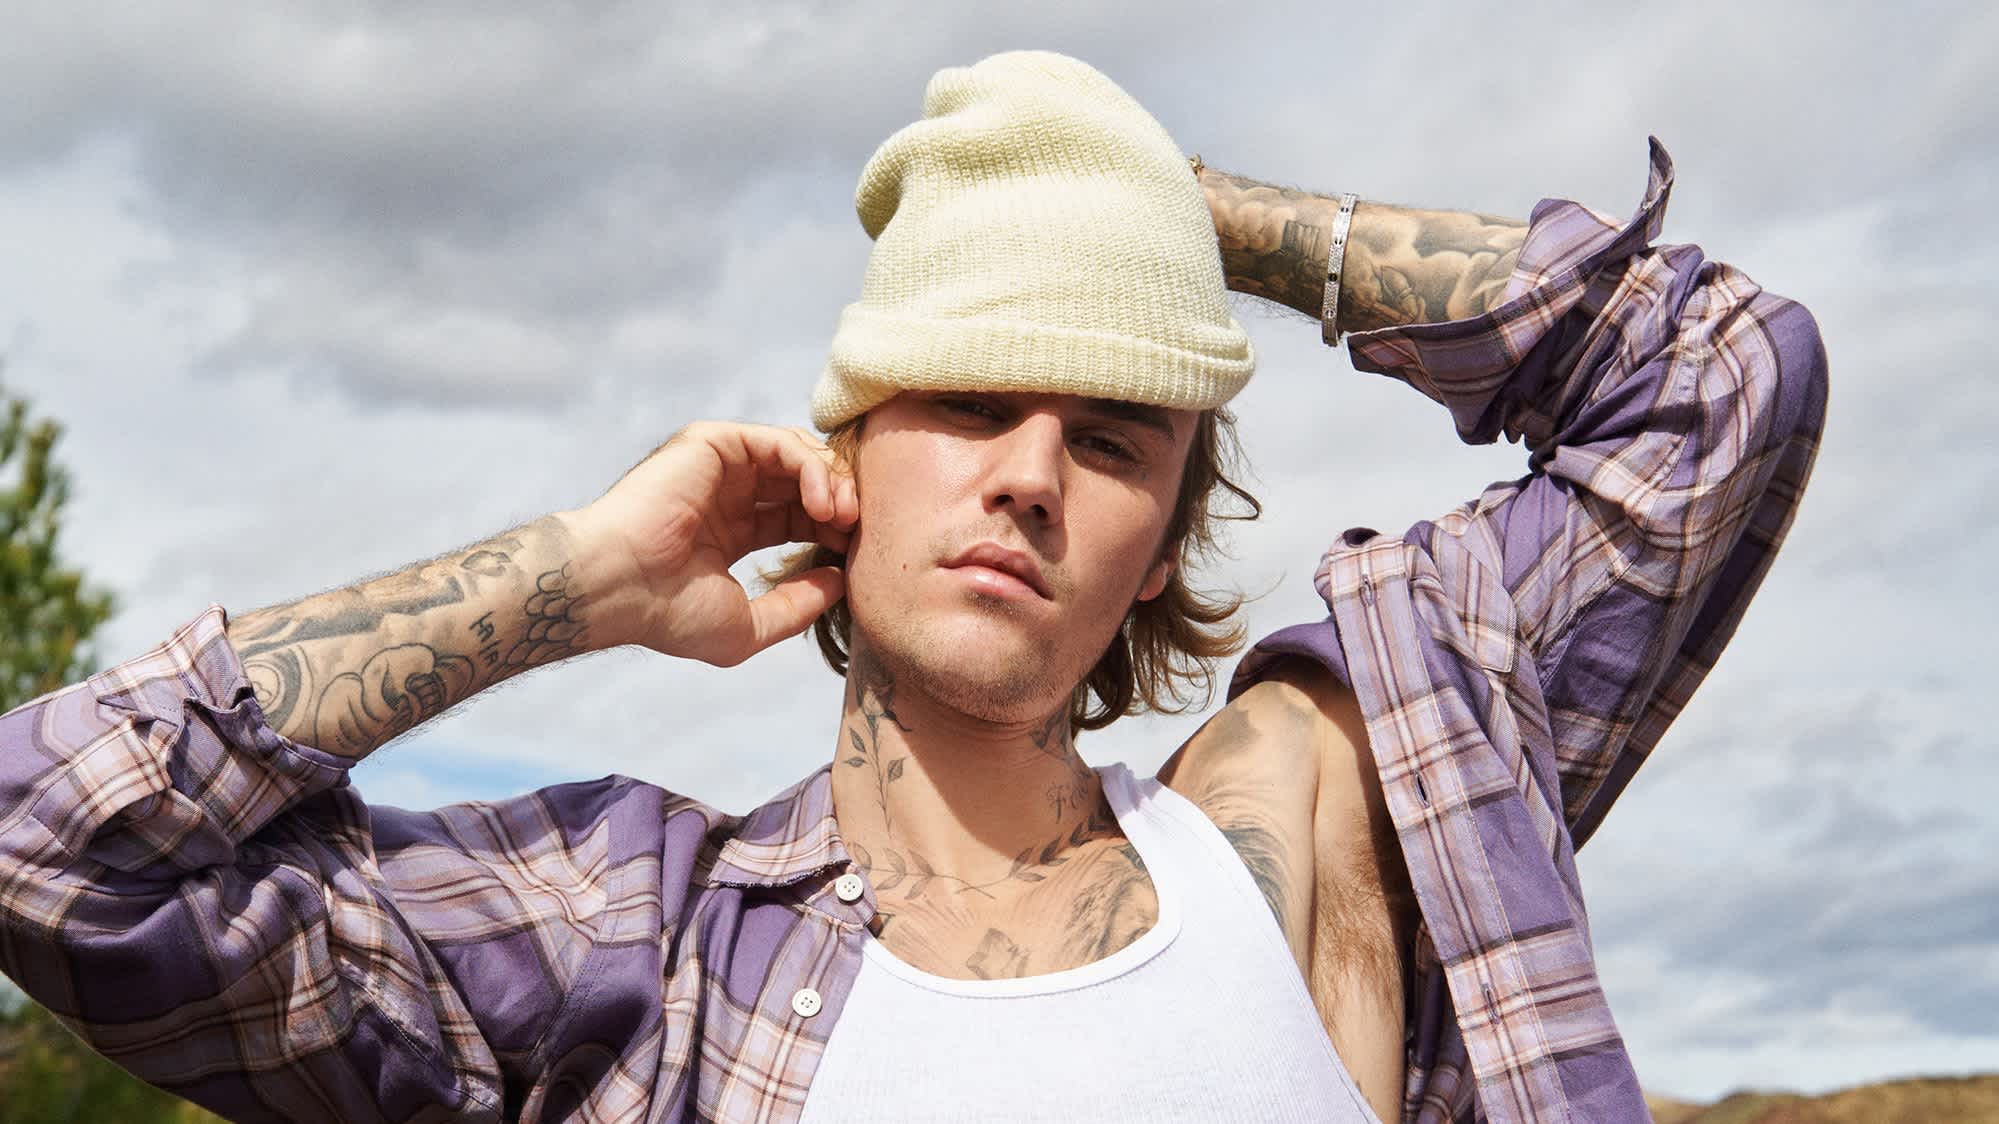 Justin Bieber and the Treadmill of Fame: The Dangers of Celebrity